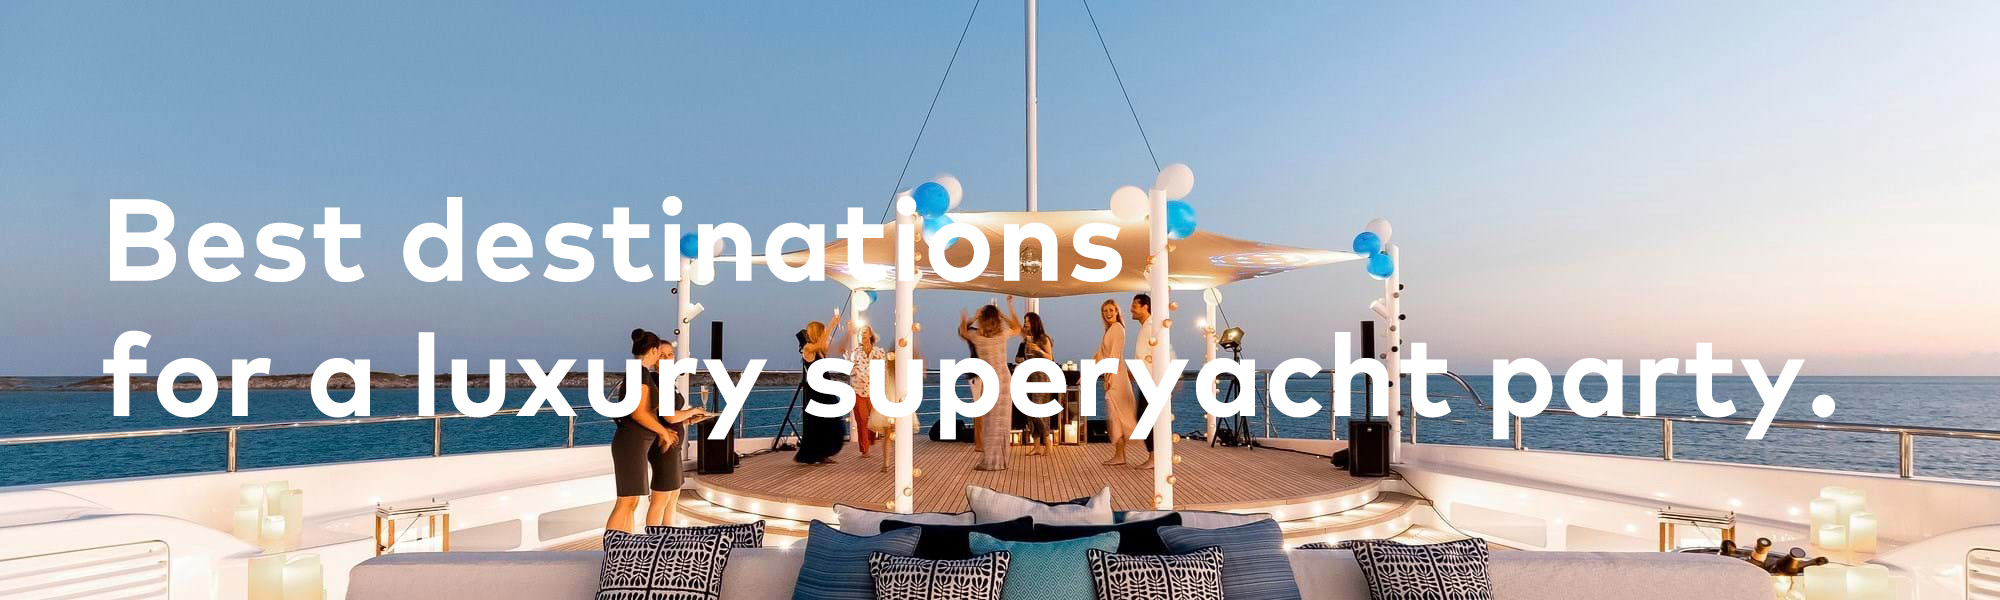 Best destinations for a luxury superyacht party.